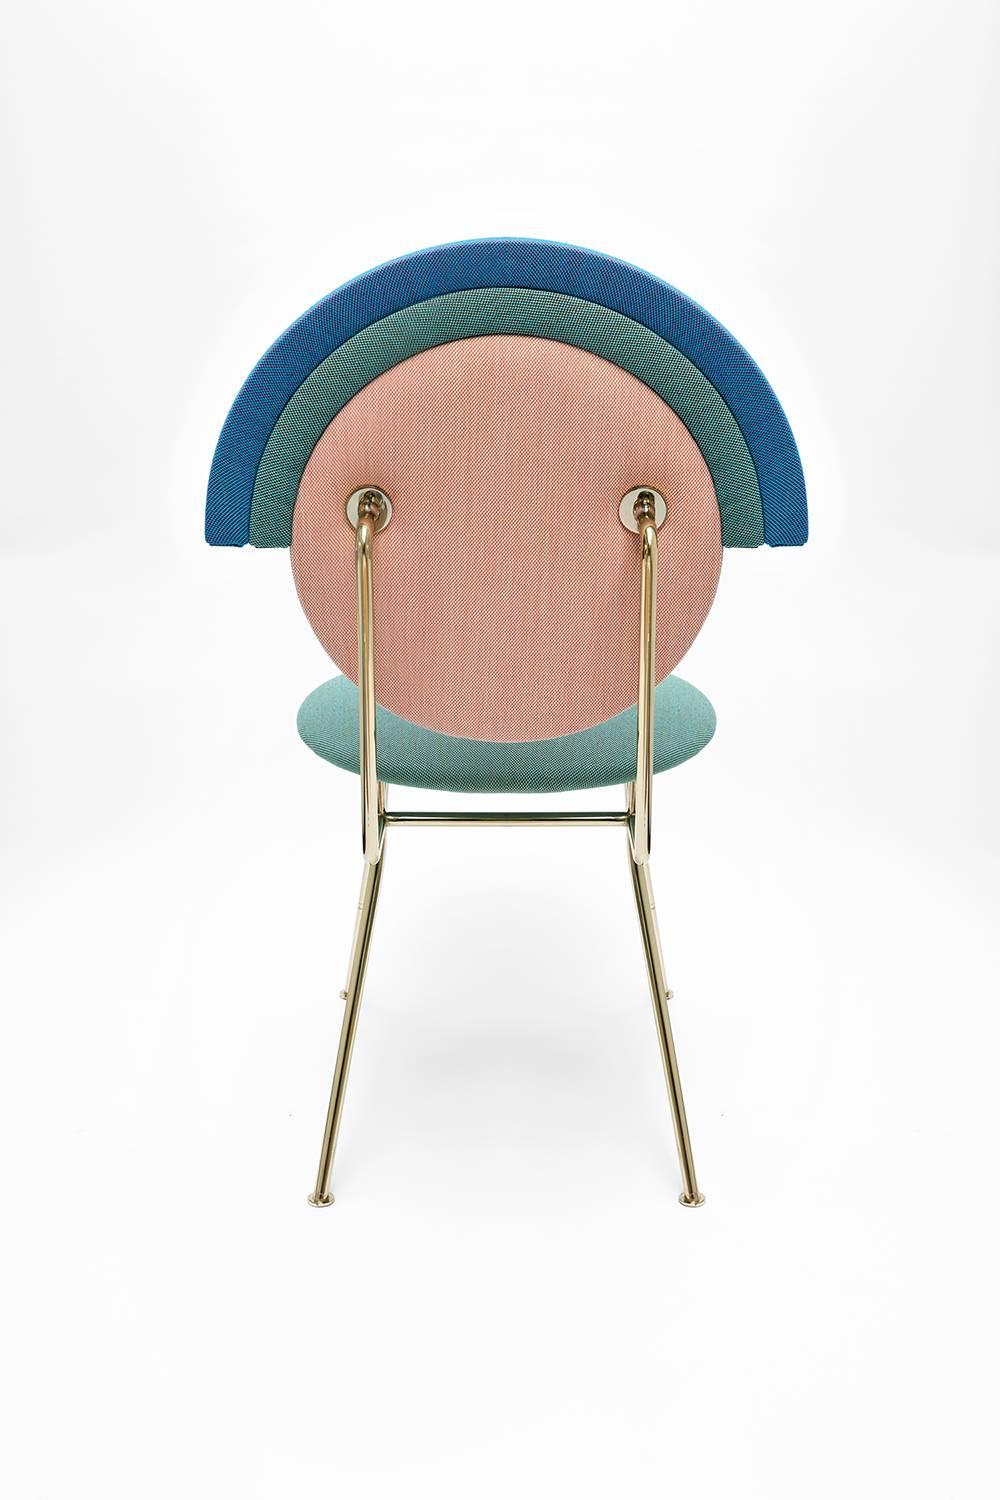 Not So General Gallery in Los Angeles is proud to present this minimal and elegant Iris chair by NY-based designer Merve Kahraman can fit in to any environment thanks to its contemporary feel.

In Greek mythology, Iris is goddess of the rainbow and